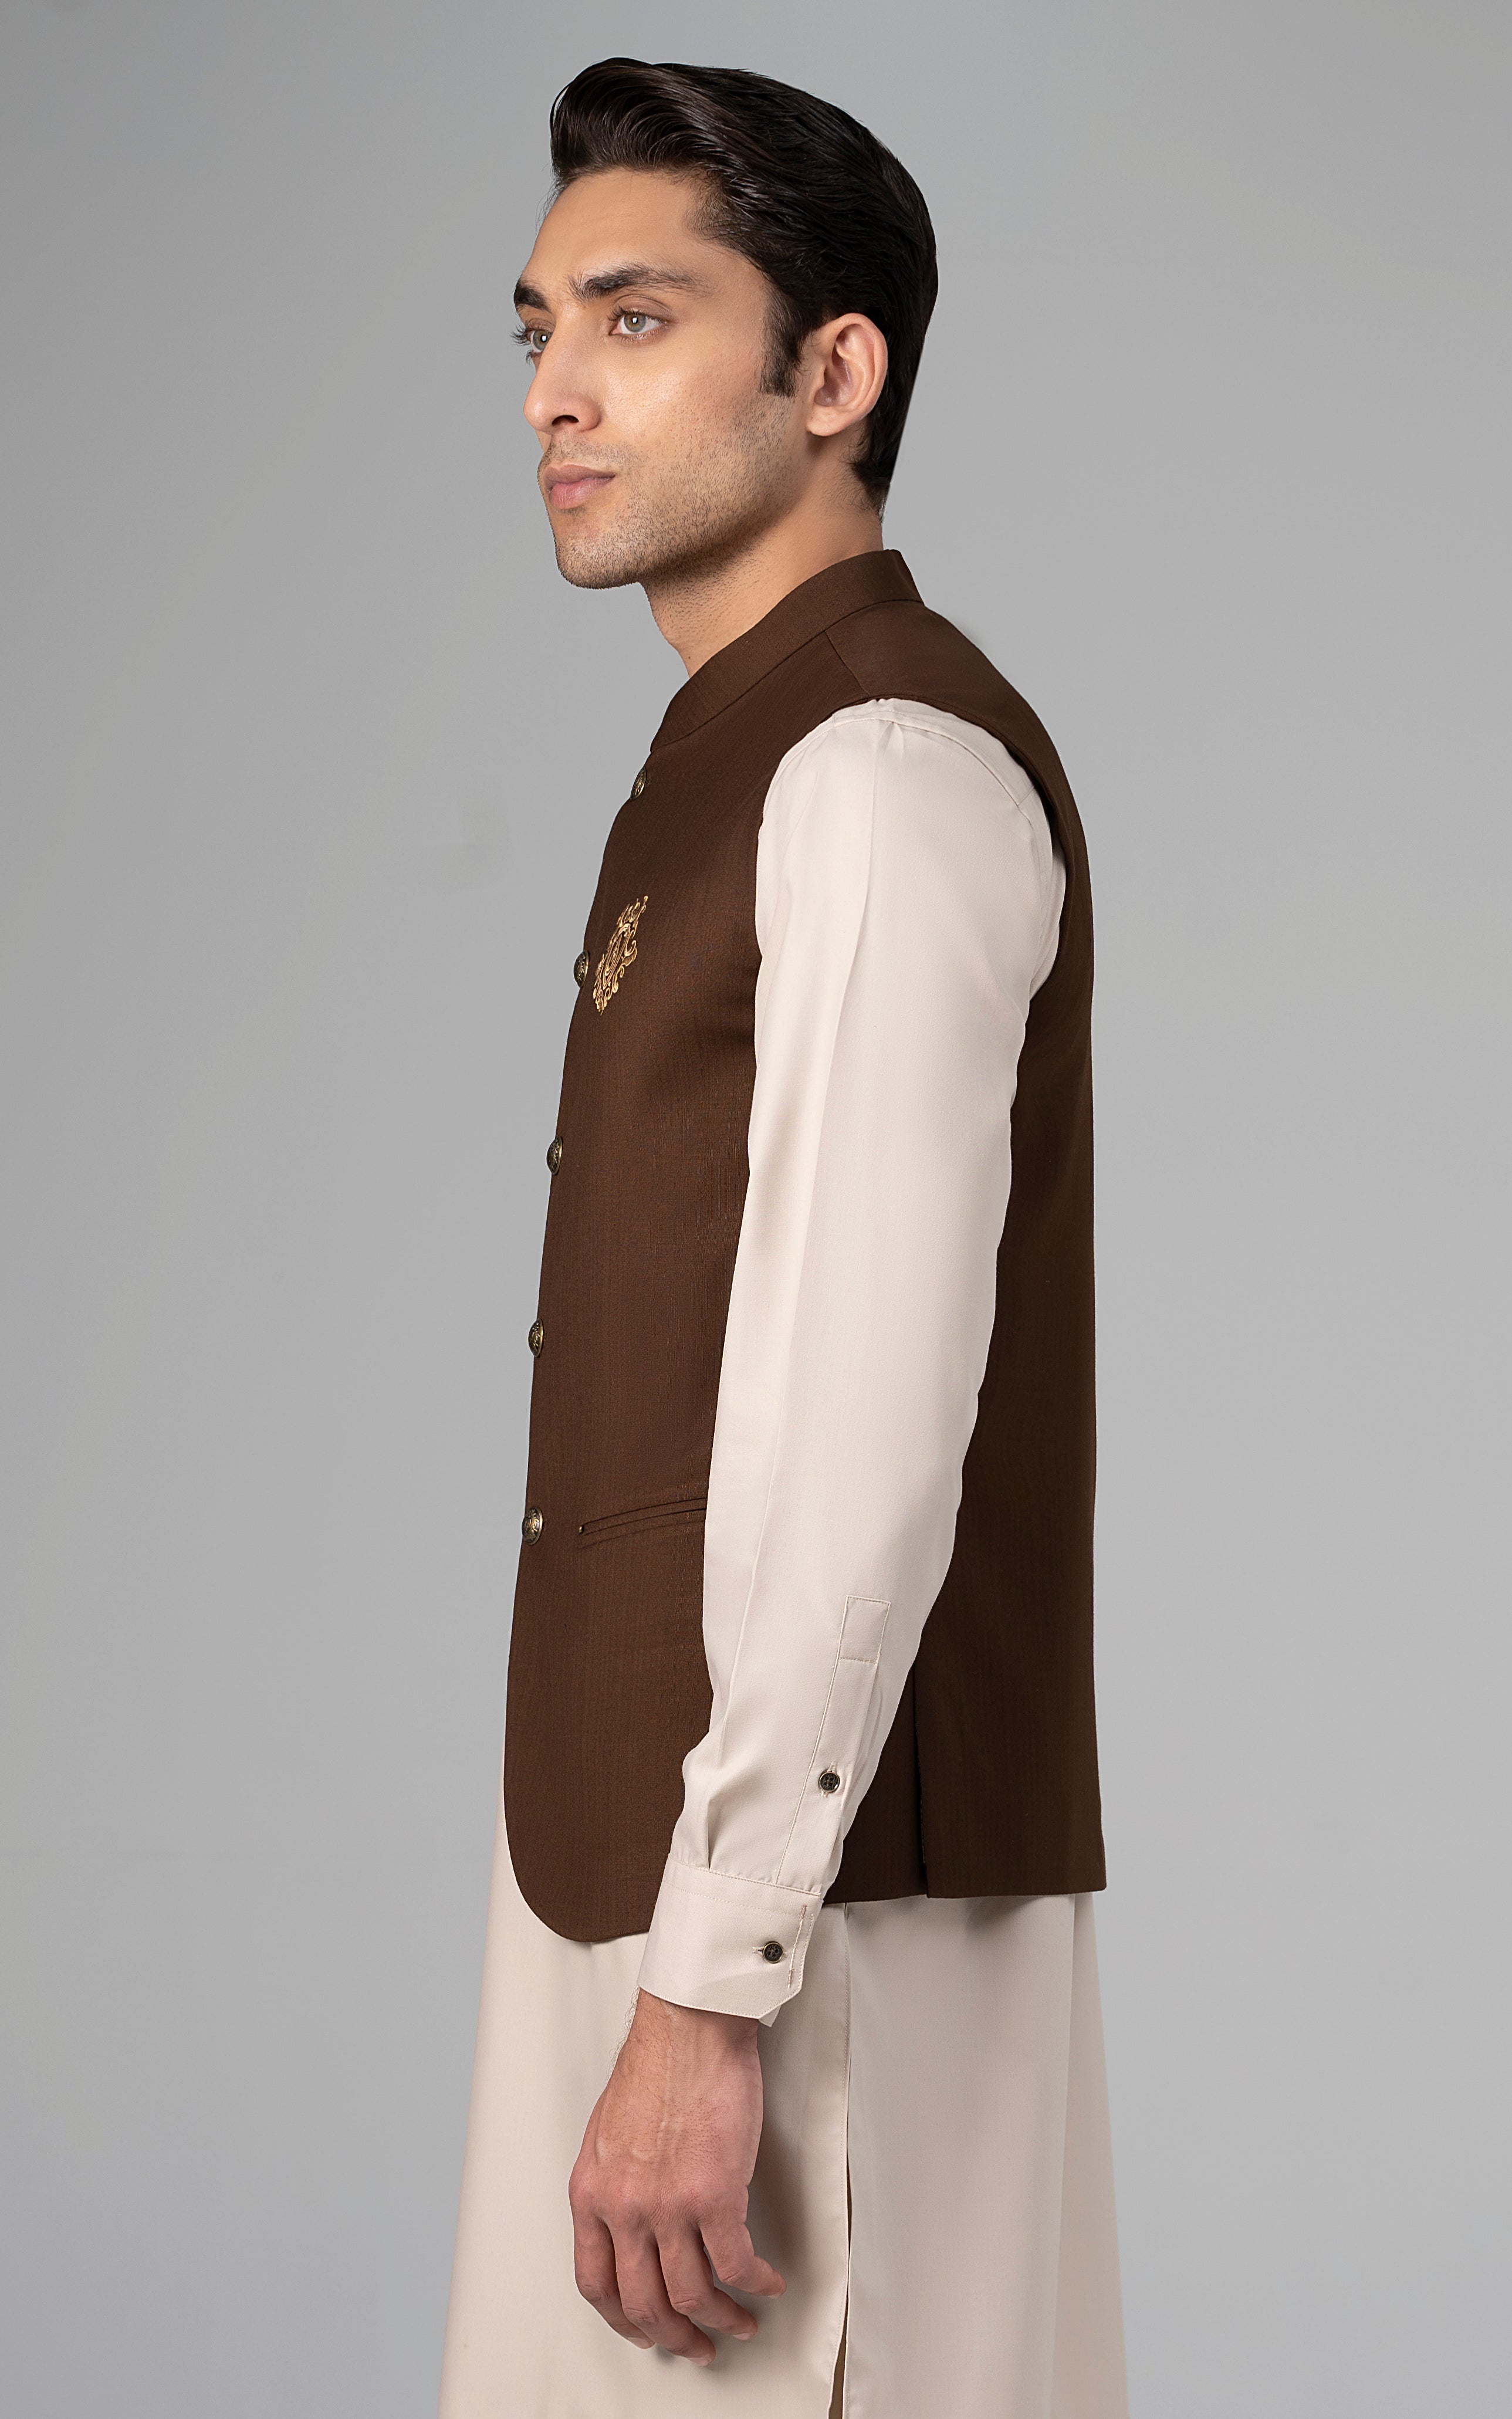 TROPICAL LOGO EMBROIDERED WAISTCOAT - SIGATURE COLLECTION BROWN